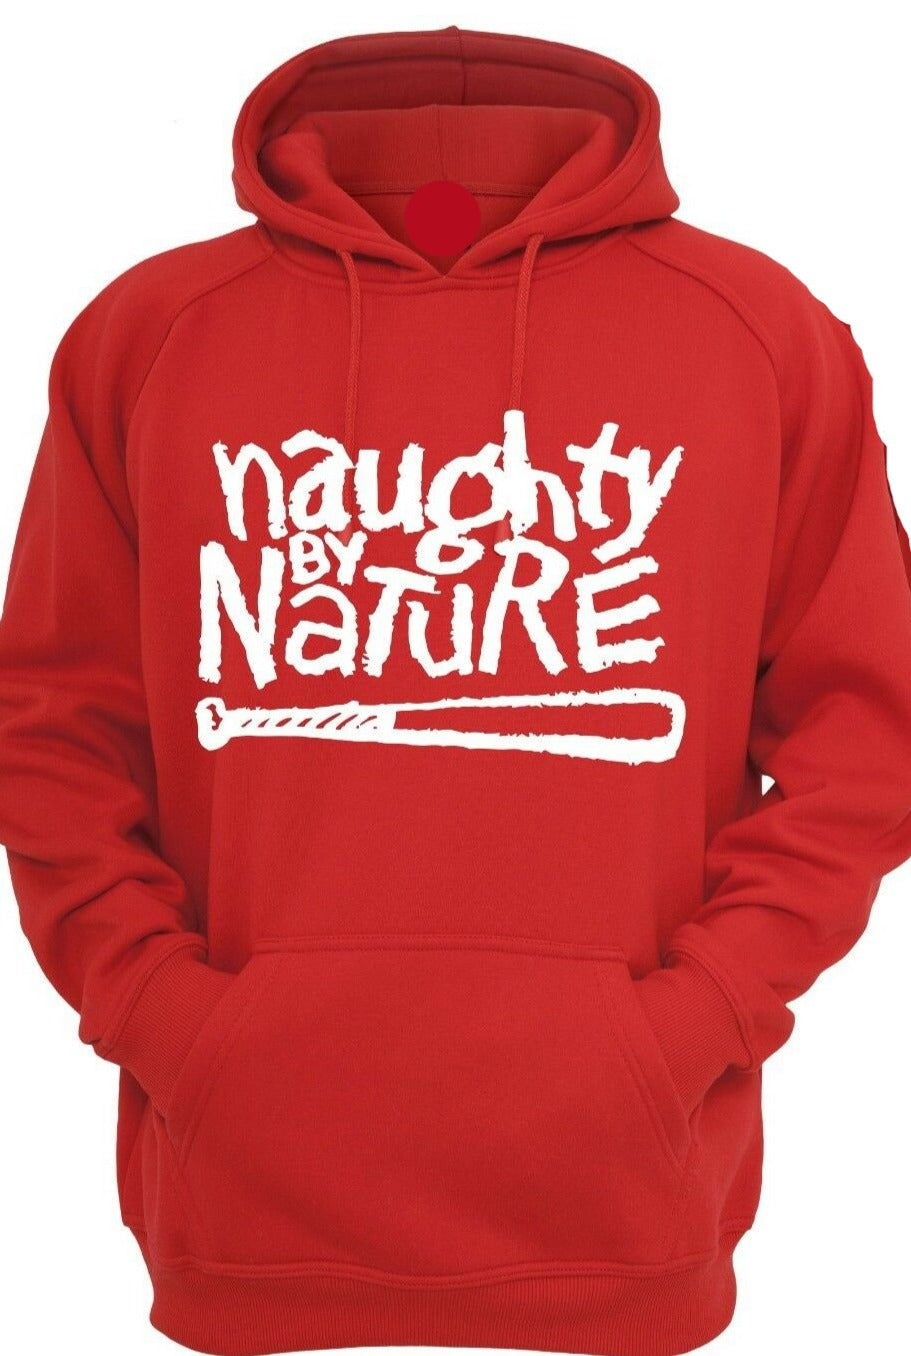 NAUGHTY BY NATURE HOODIE RED MENS/WOMENS